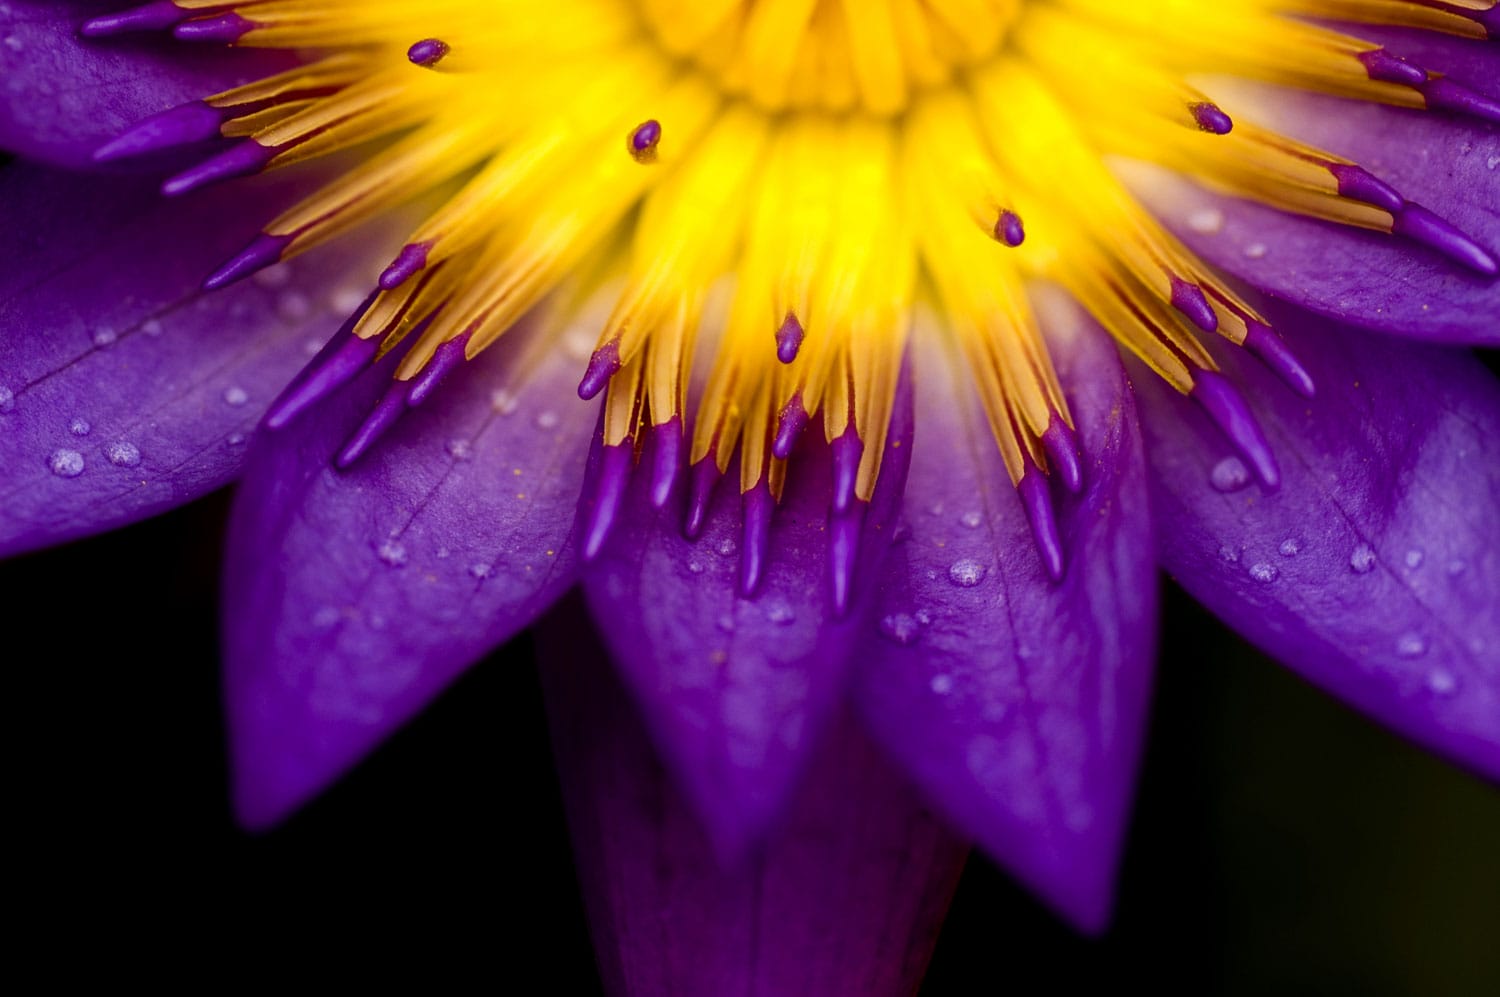 Photographing Flowers: Tips for Close-Up Flower Photos